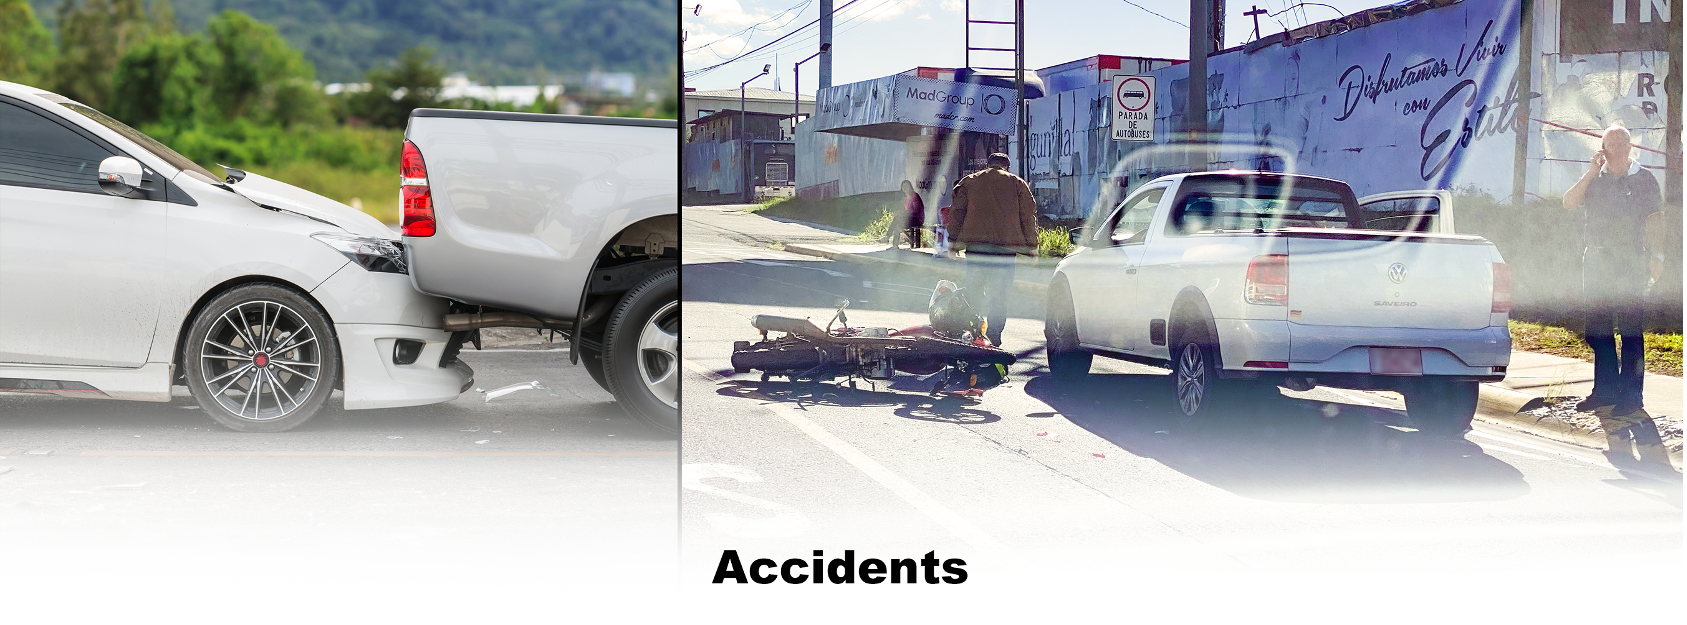 Images depicting car accidents in Costa Rica